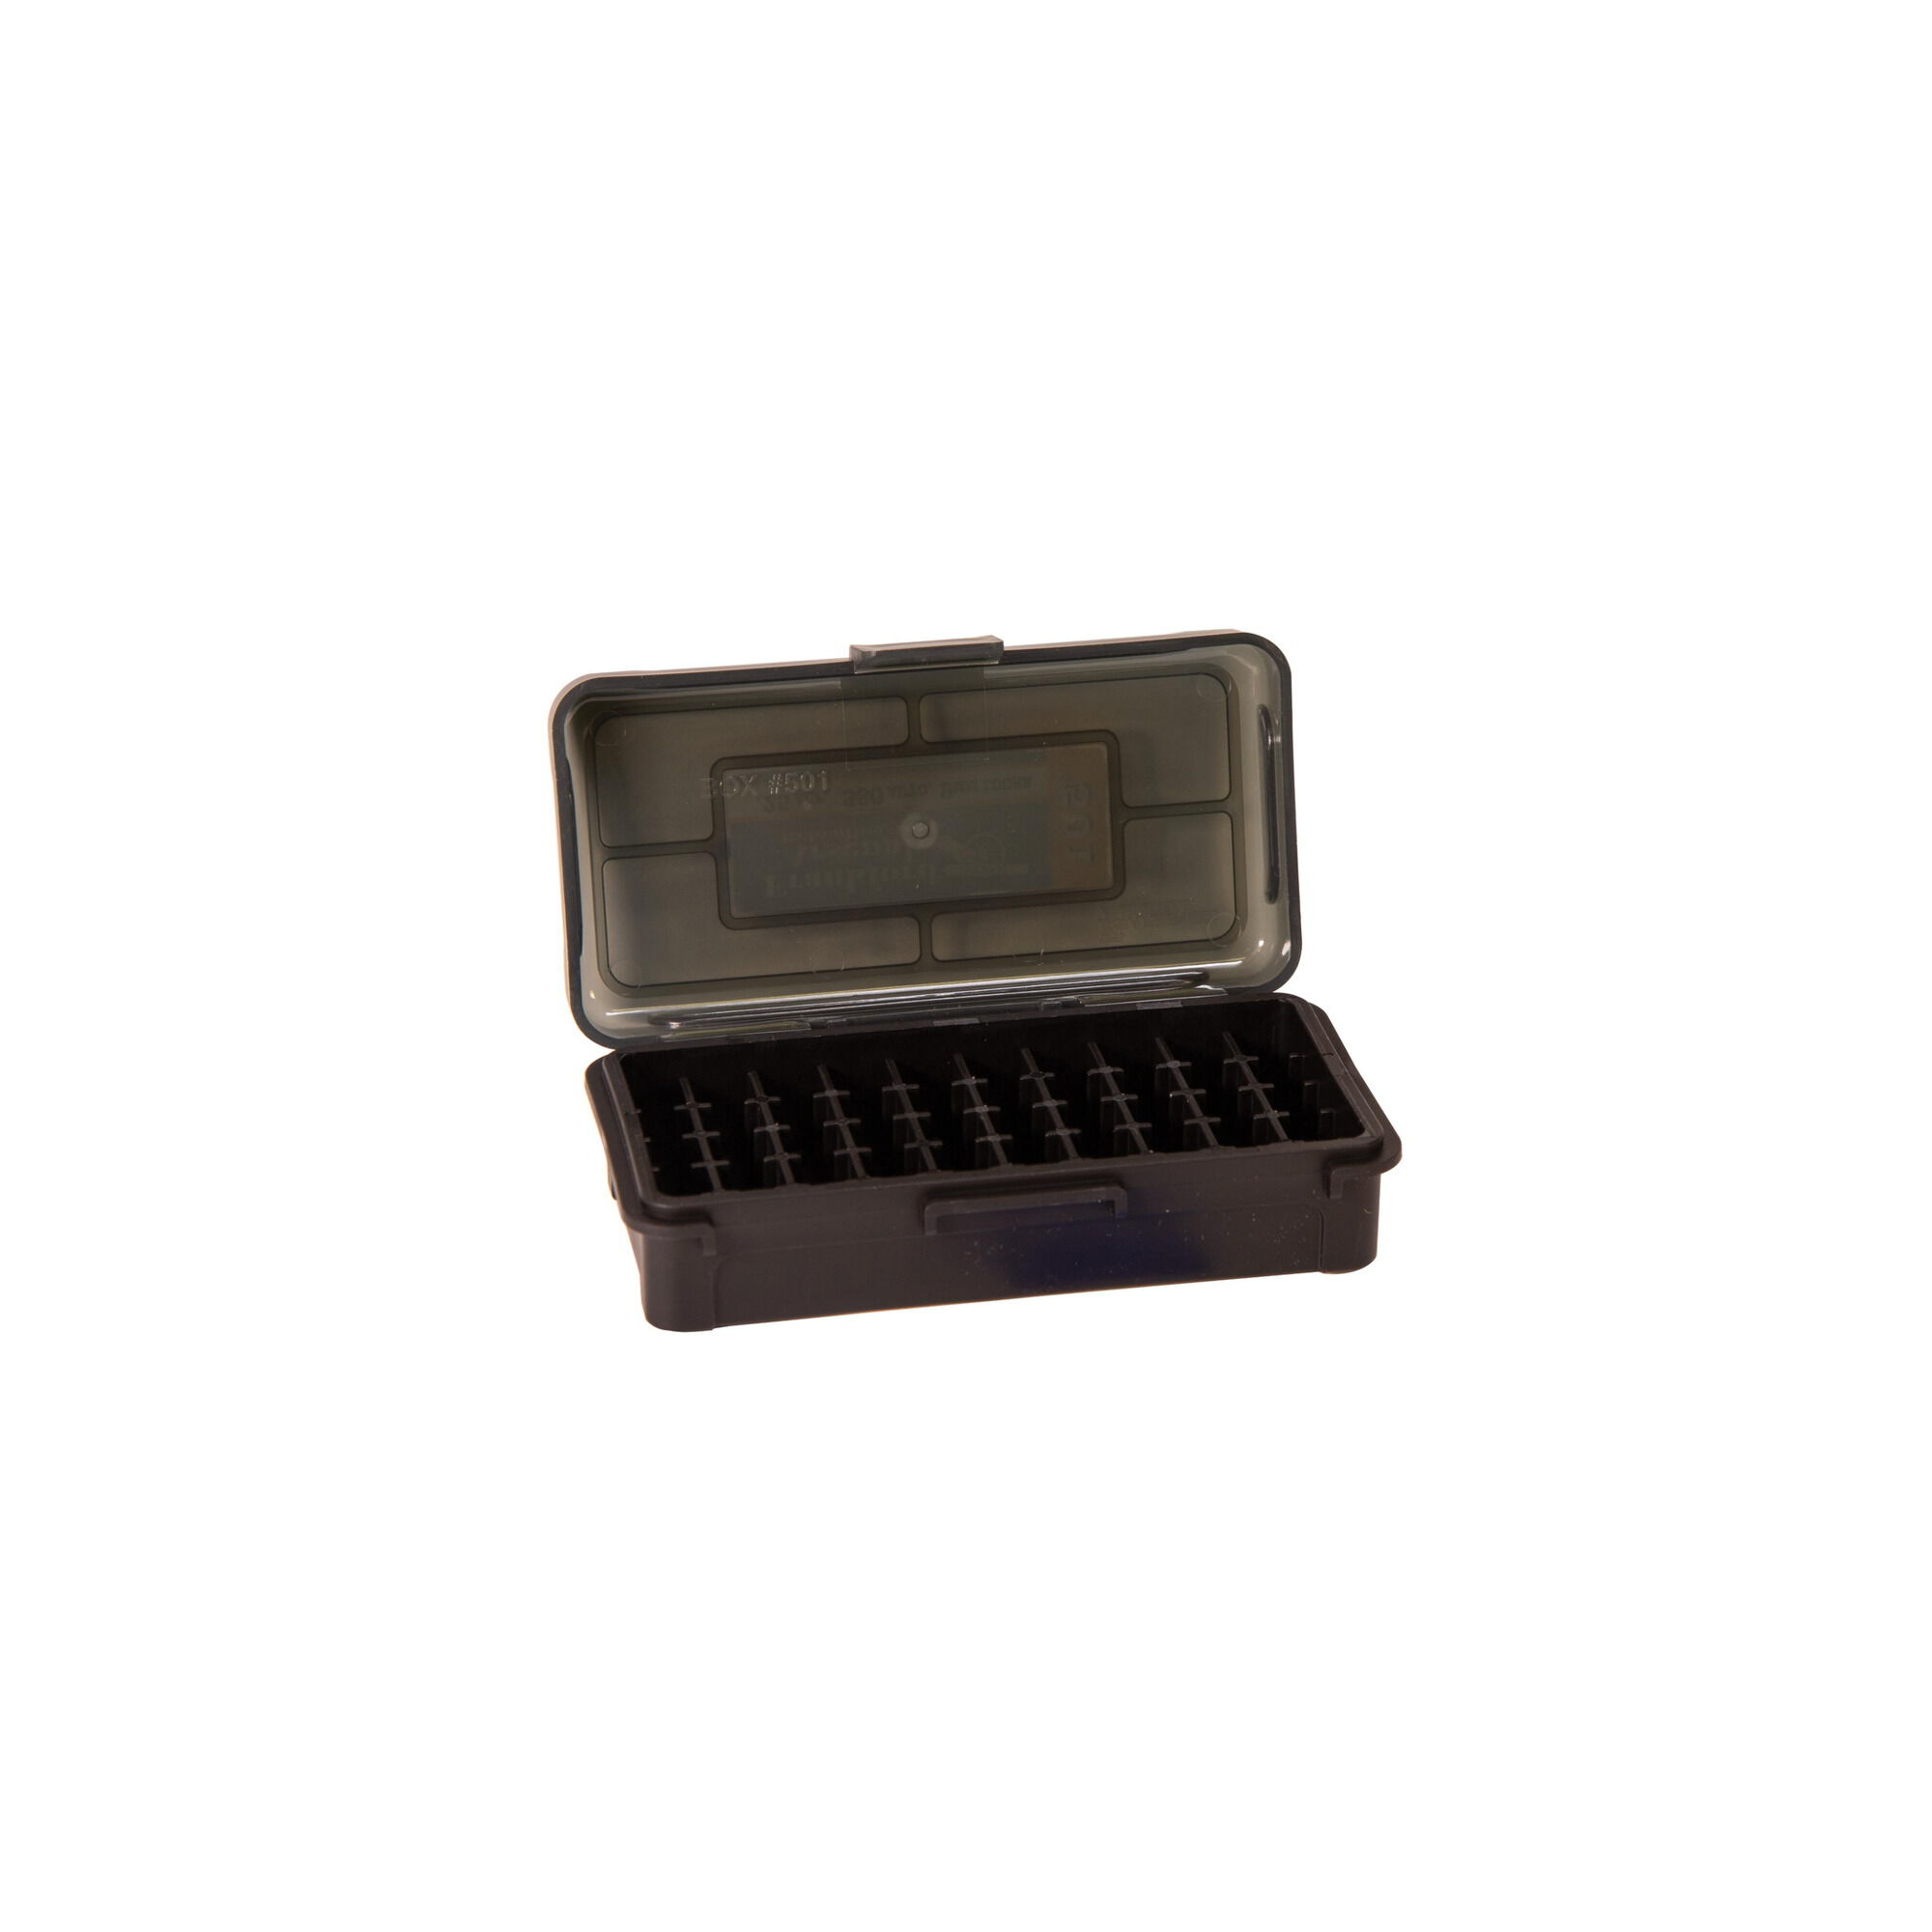 Details about   Frankford Arsenal Hinge Top Ammo Box 509 .243-308 50 Rnd